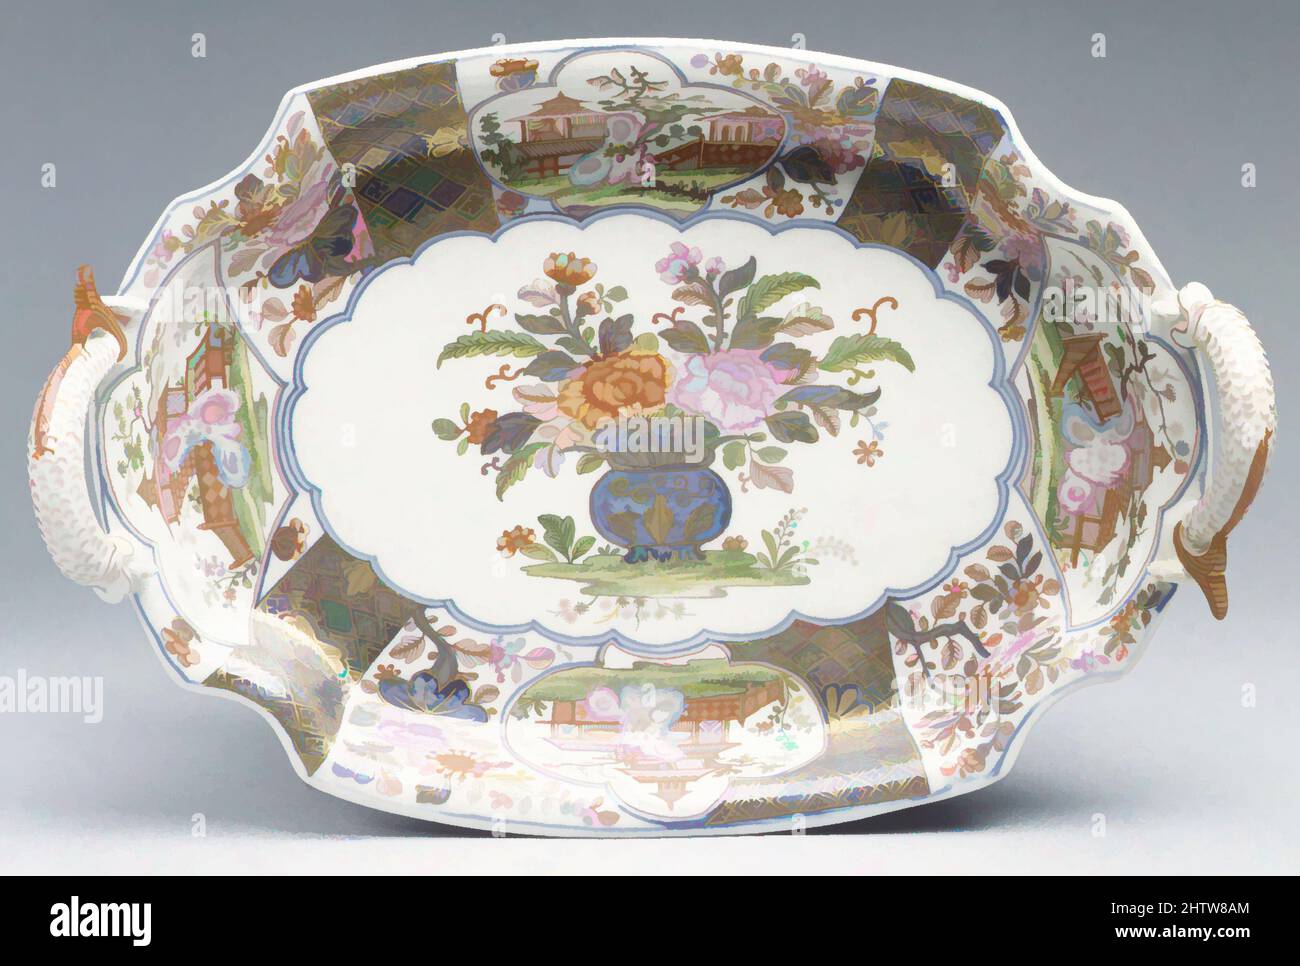 Art inspired by Tray with vase of flowers, ca. 1730–35, Austrian, Vienna, Hard-paste porcelain painted with colored enamels over transparent glaze, Gr. L. 15-11/16 in. (38.6 cm.); H. 3-9/16 in. (9.0 cm.); D. 9-3/4 in. (24.8 cm.), Ceramics-Porcelain, Classic works modernized by Artotop with a splash of modernity. Shapes, color and value, eye-catching visual impact on art. Emotions through freedom of artworks in a contemporary way. A timeless message pursuing a wildly creative new direction. Artists turning to the digital medium and creating the Artotop NFT Stock Photo